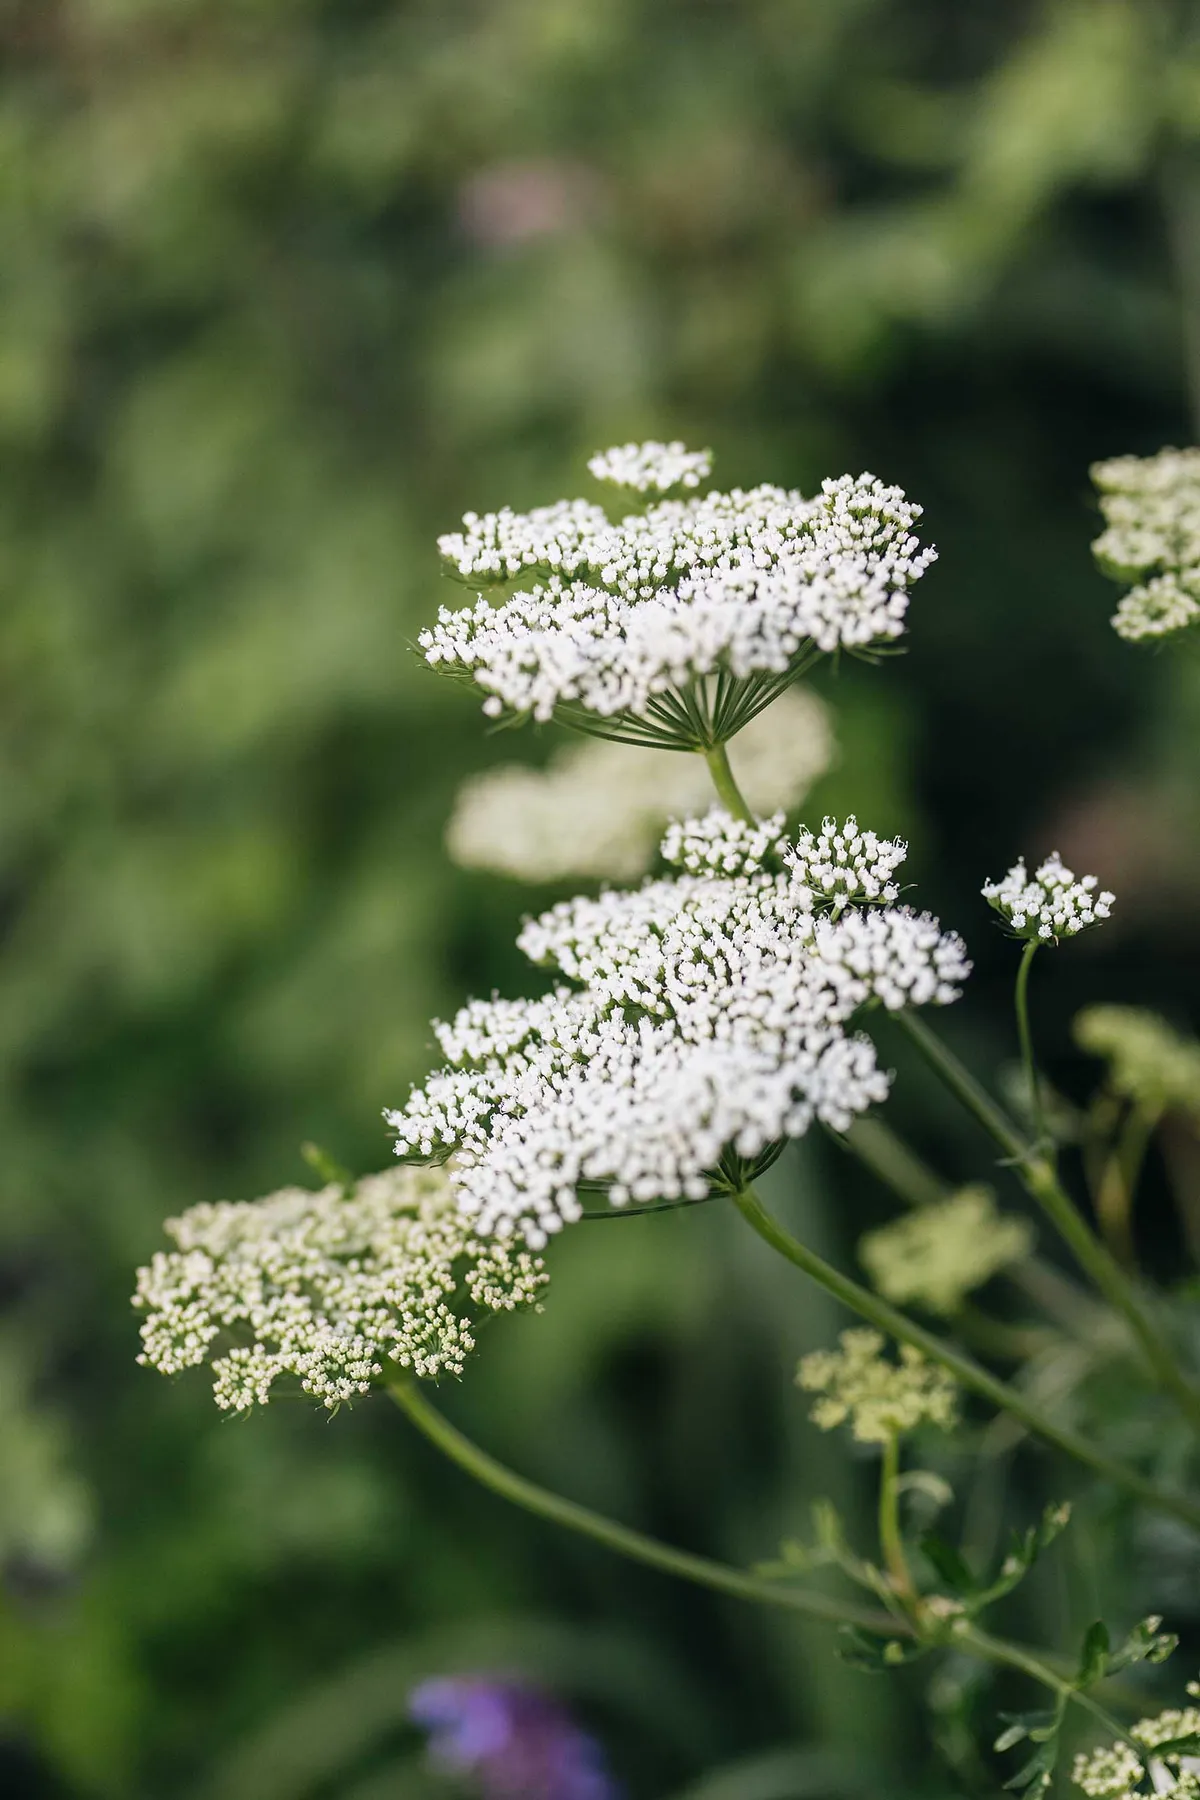 Cenolophium denudatam (Baltic parsley) has lacy, flat-topped umbels of creamy-white flowers, which rise from mounds of fine, fern-like foliage in midsummer and last well into autumn. An airy addition to a border and attractive to beneficial insects.